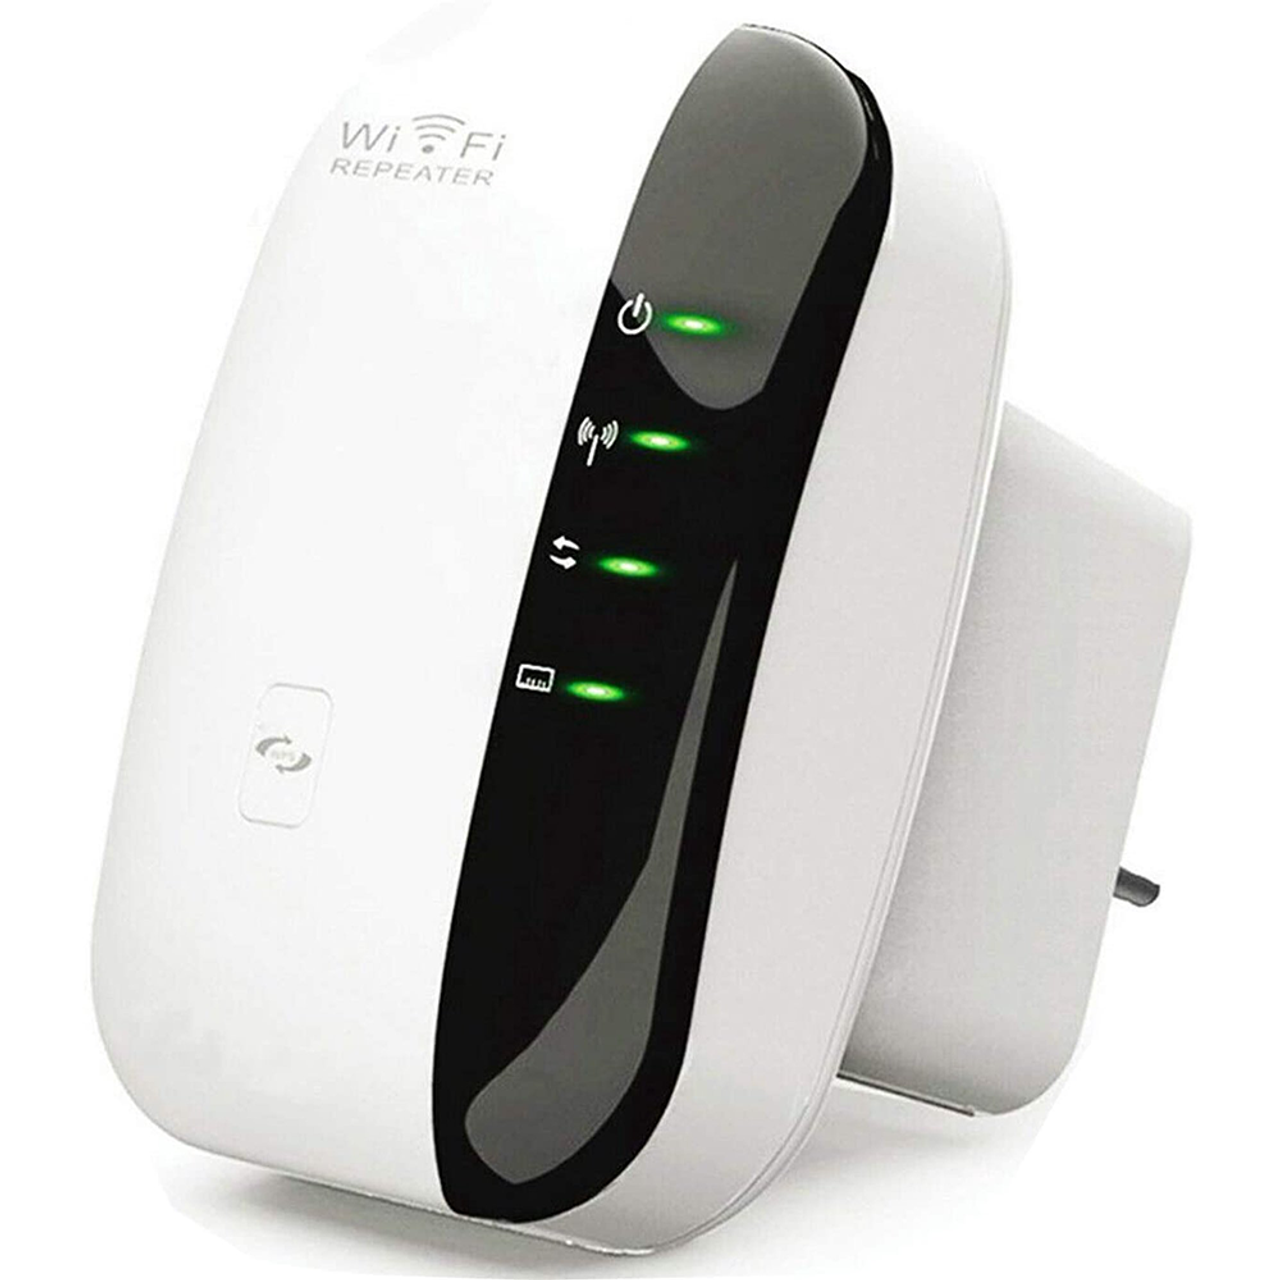 Wi-Fi Repeater Wireless Long Range Extender Amplifier product image